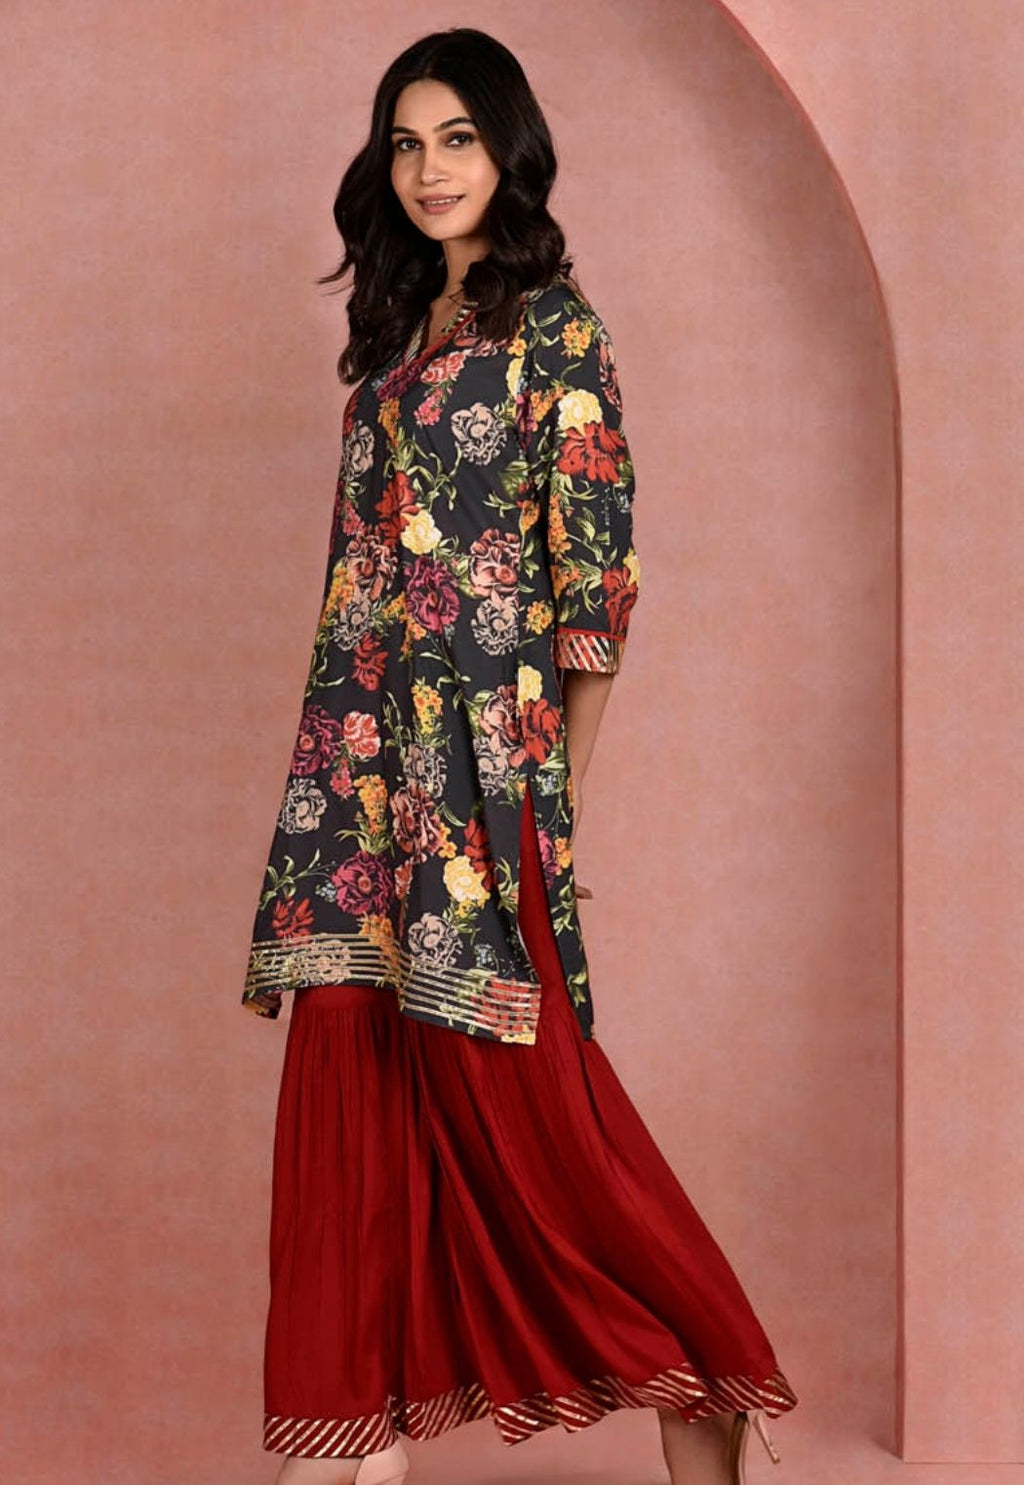 Floral Short Kurta with Contrast Solid Coloured Pants